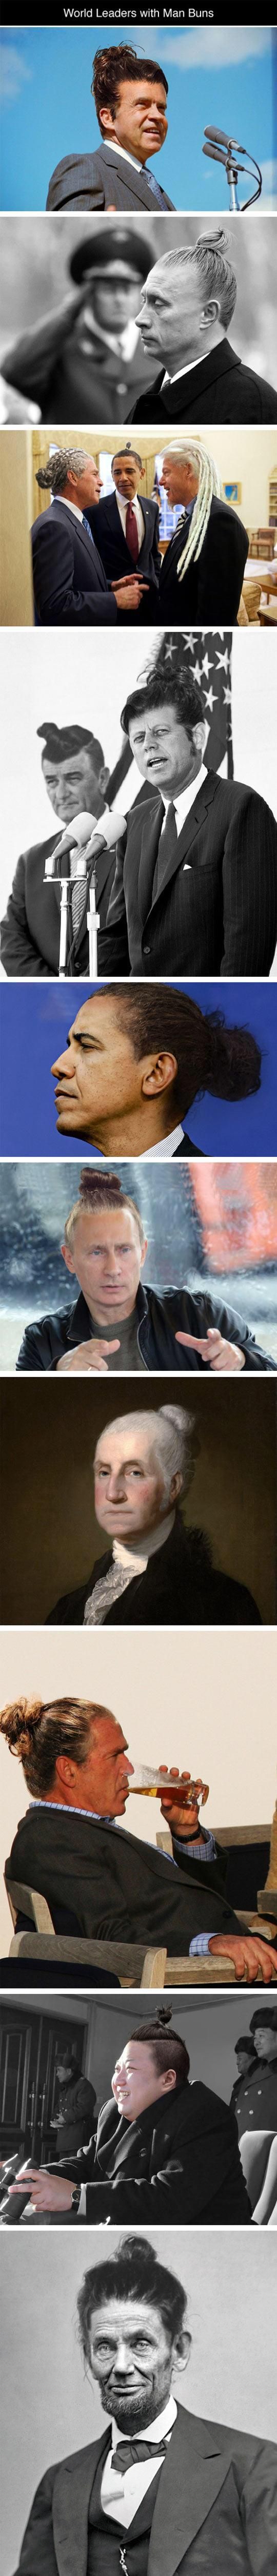 World leaders with man buns. For all your man bun needs.